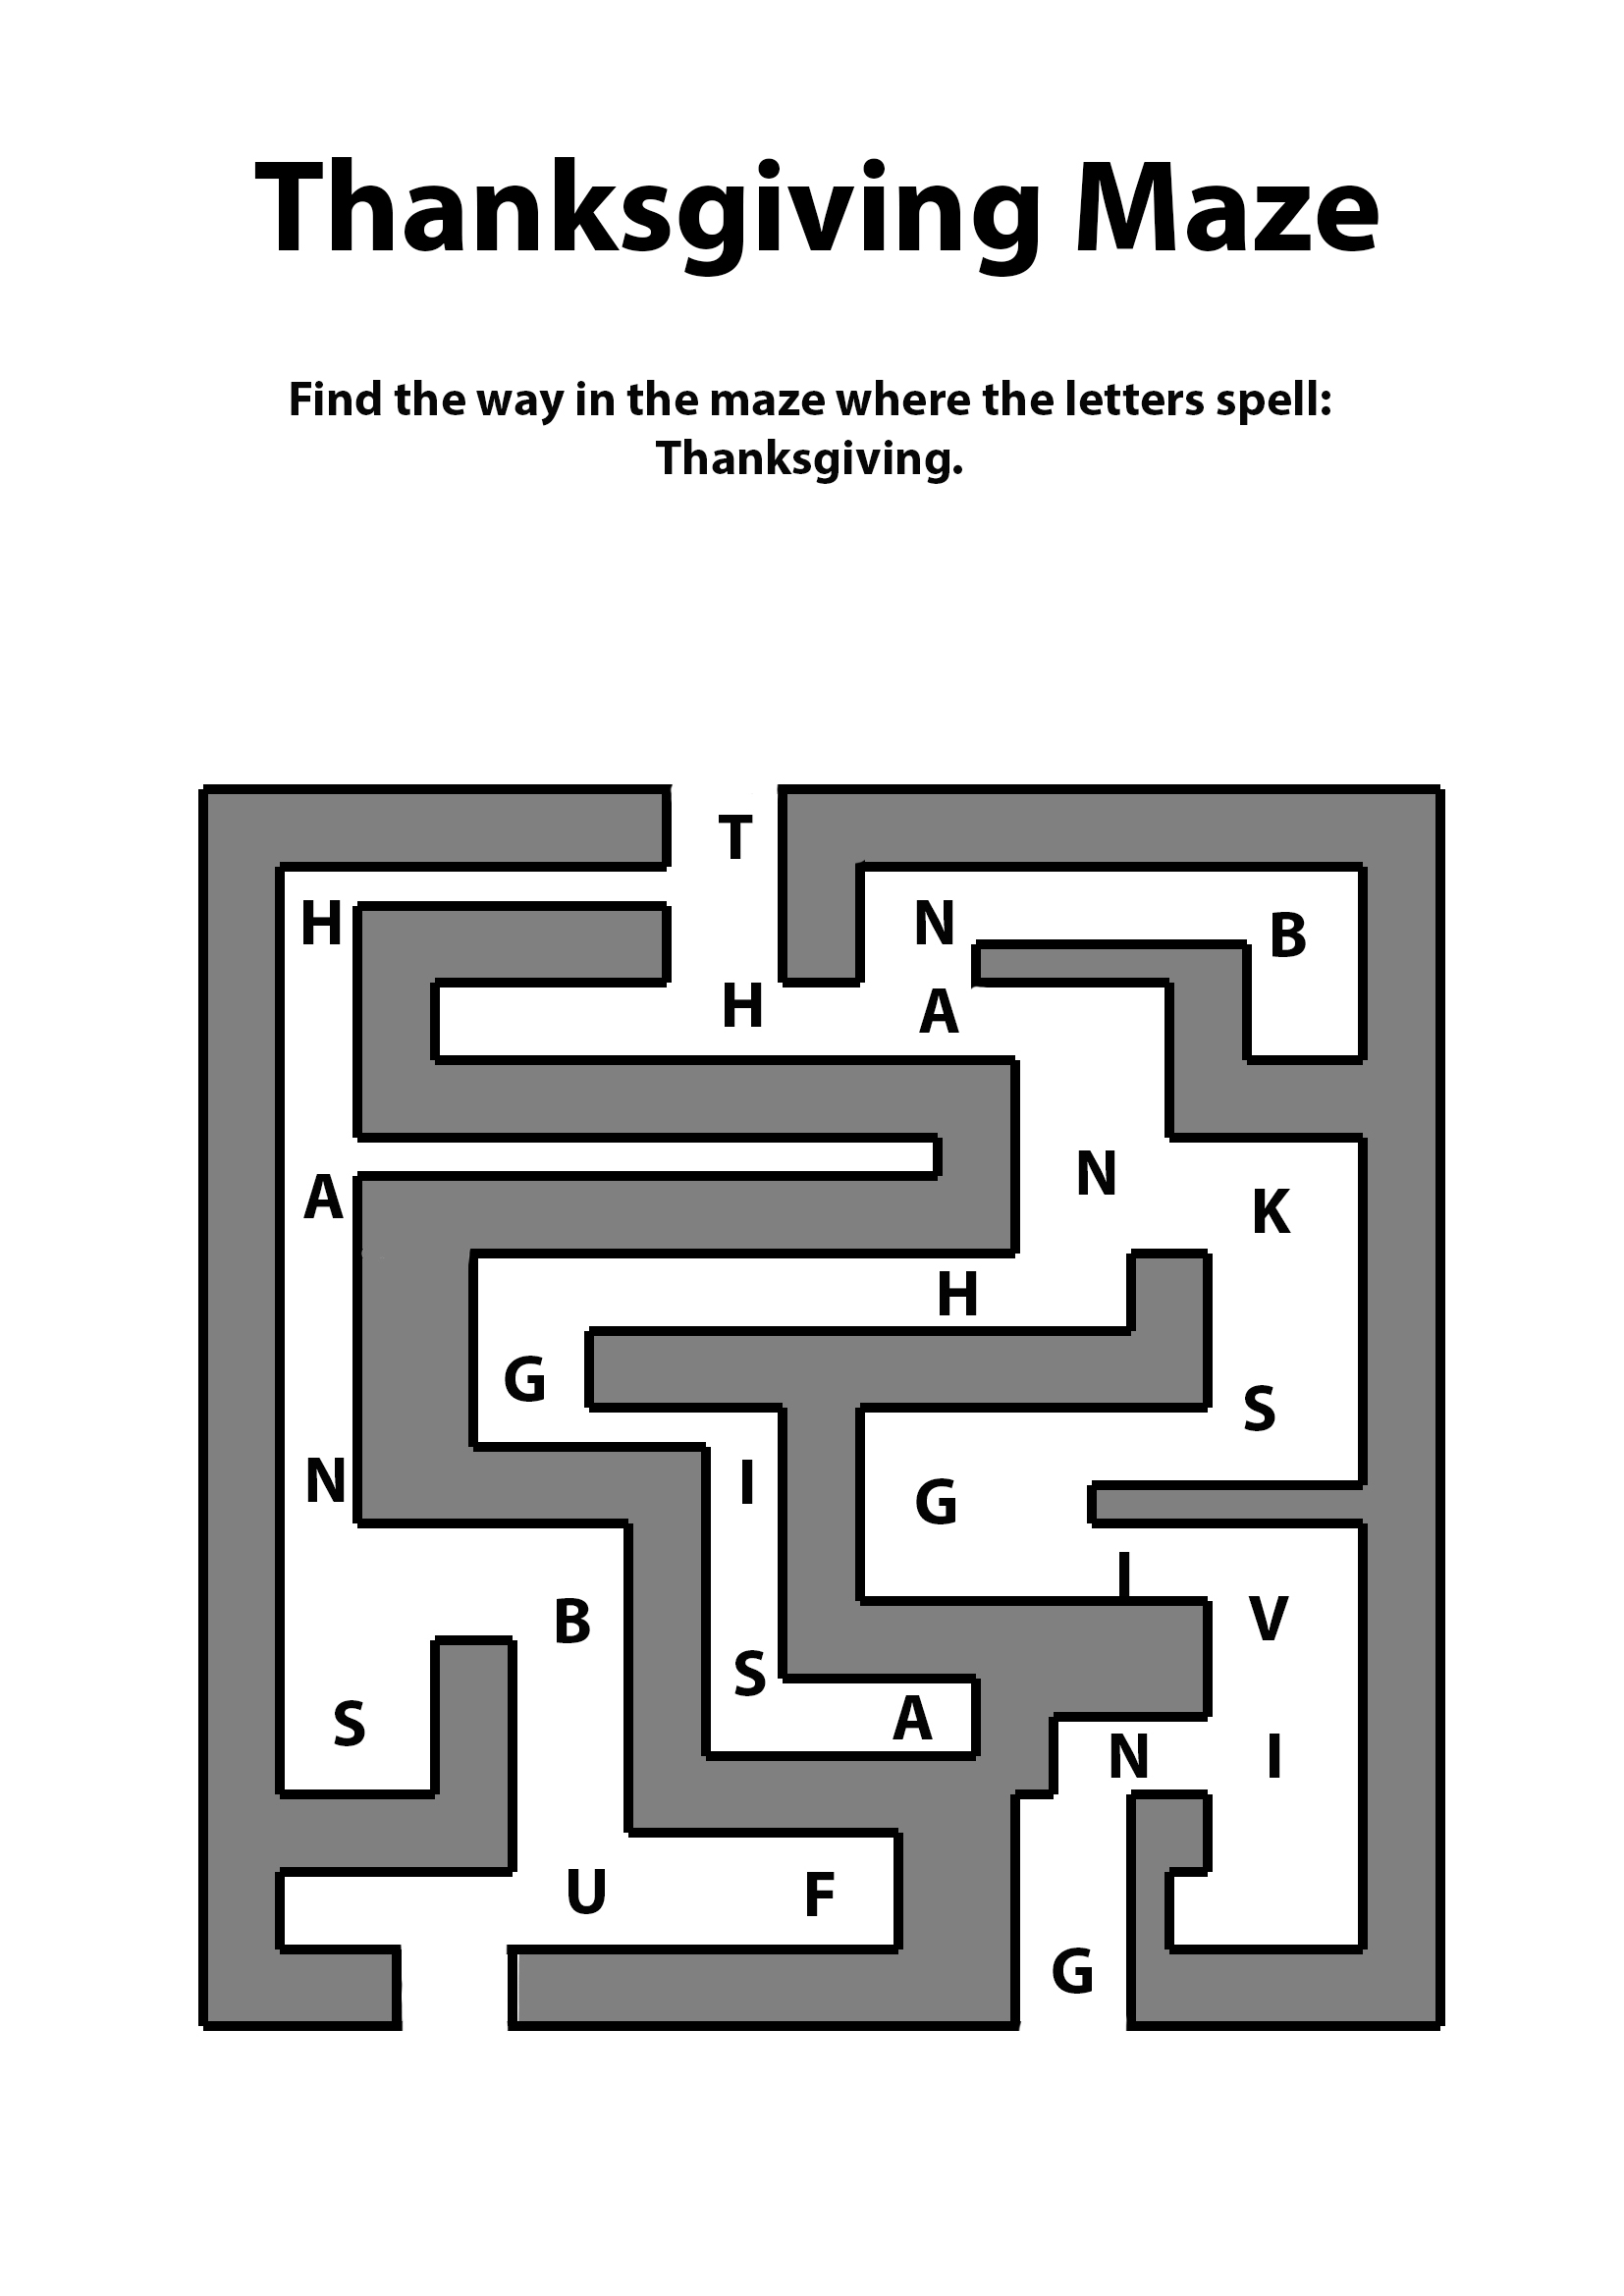 Thanksgiving maze with letters